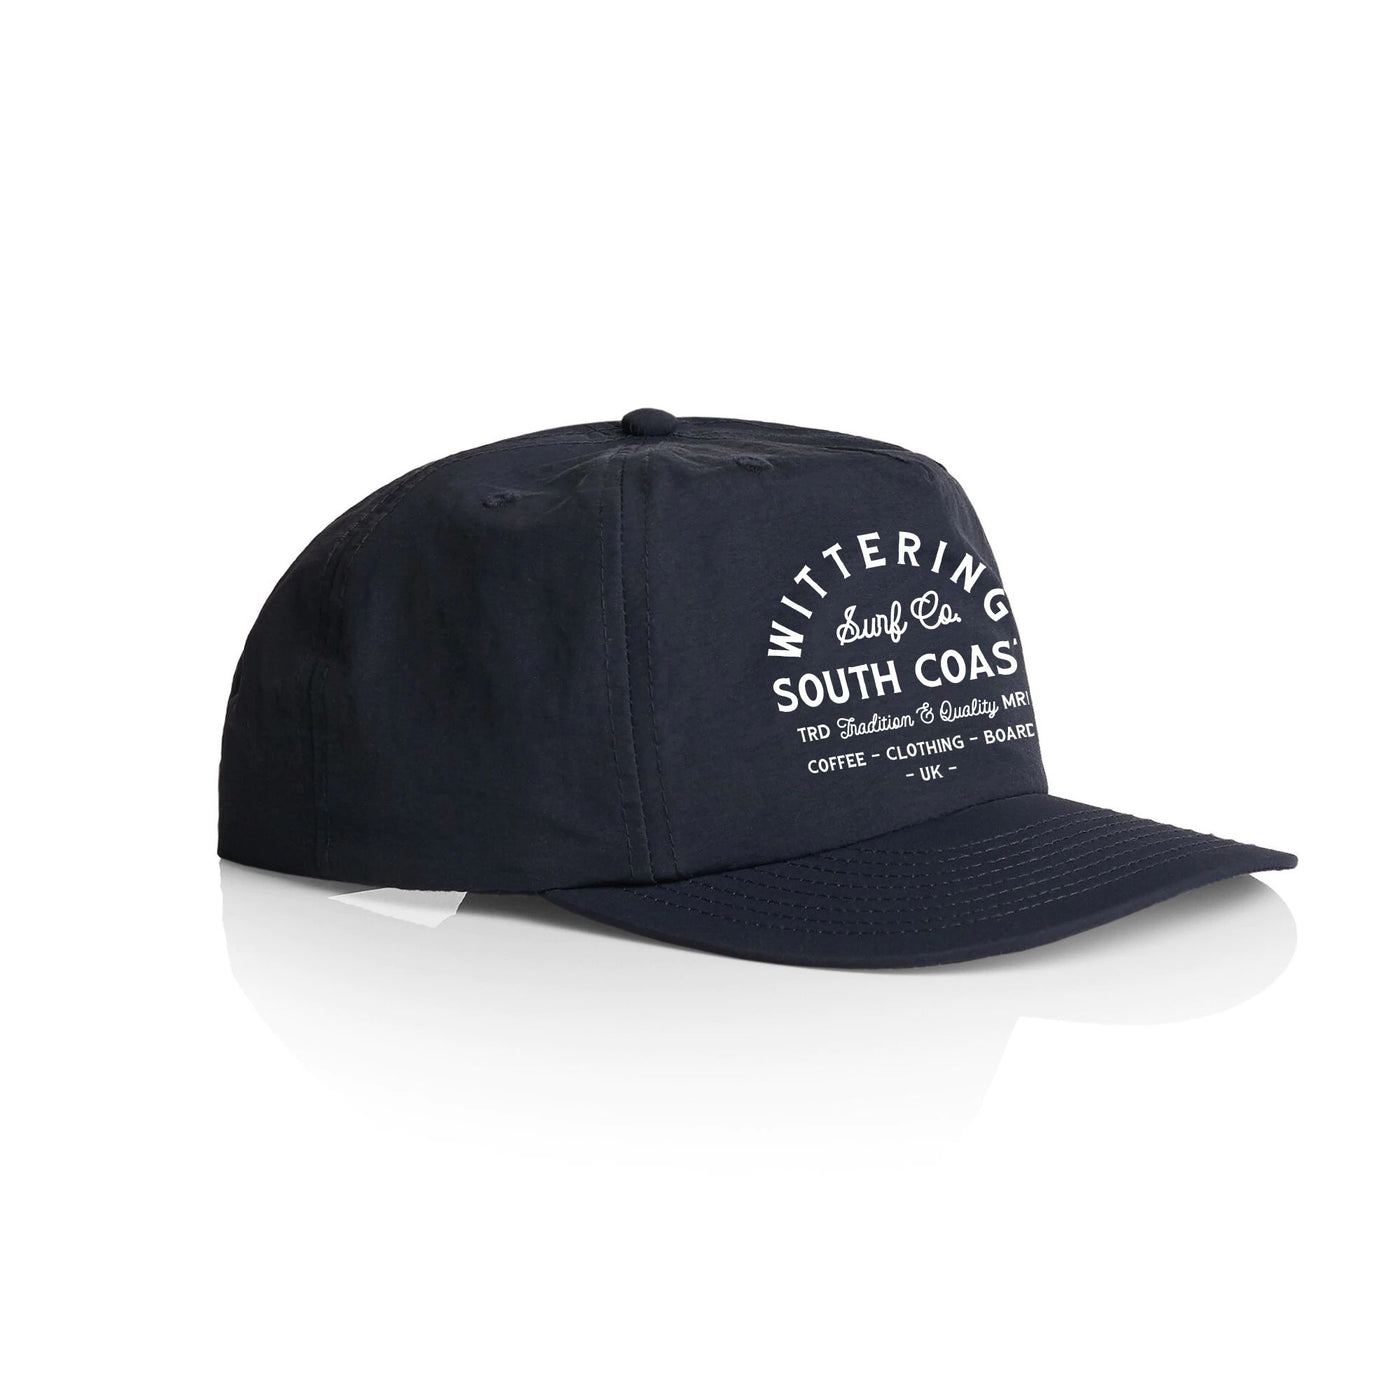 SOUTH COAST CAP - NAVY - Wittering Surf Shop